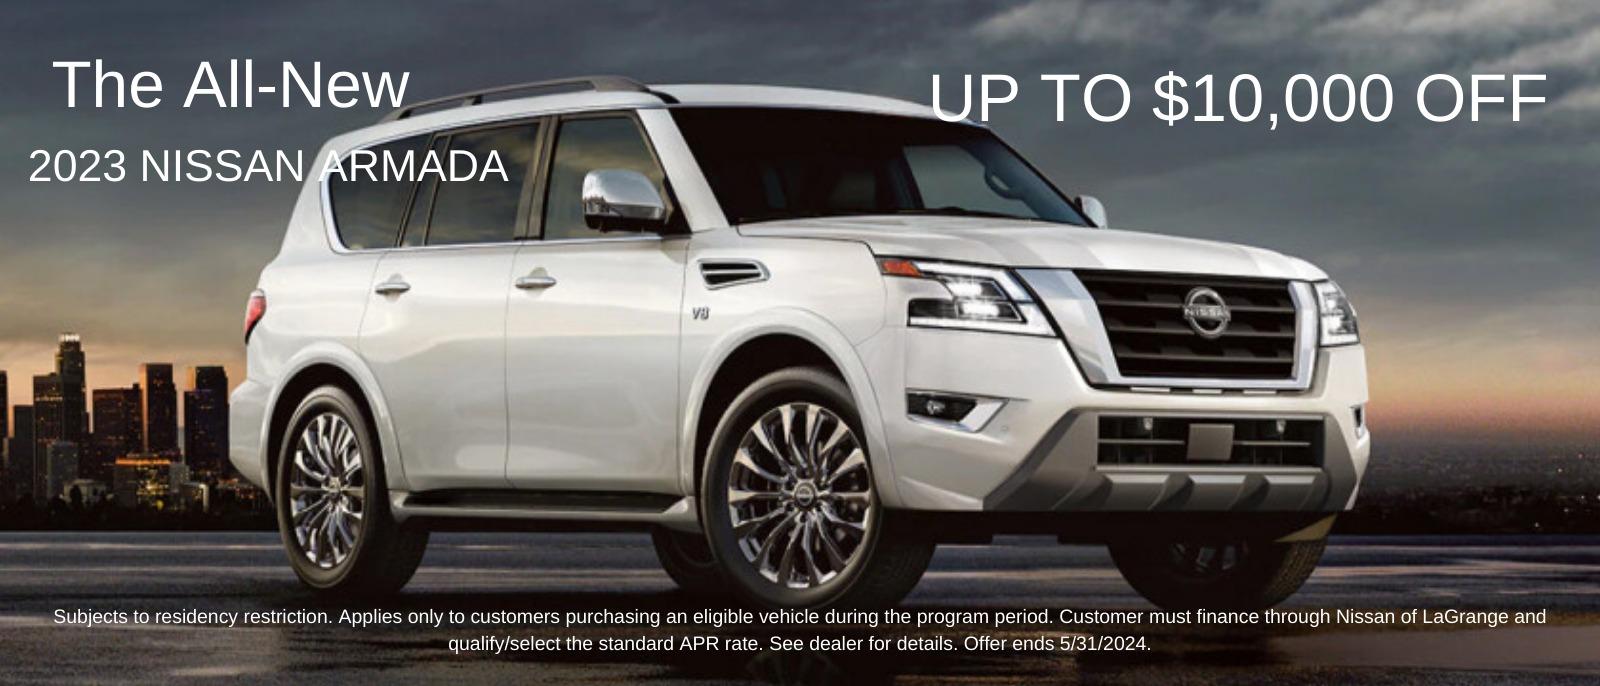 The All-New 2023 Nissan Armada
Upto $10,000 OFF